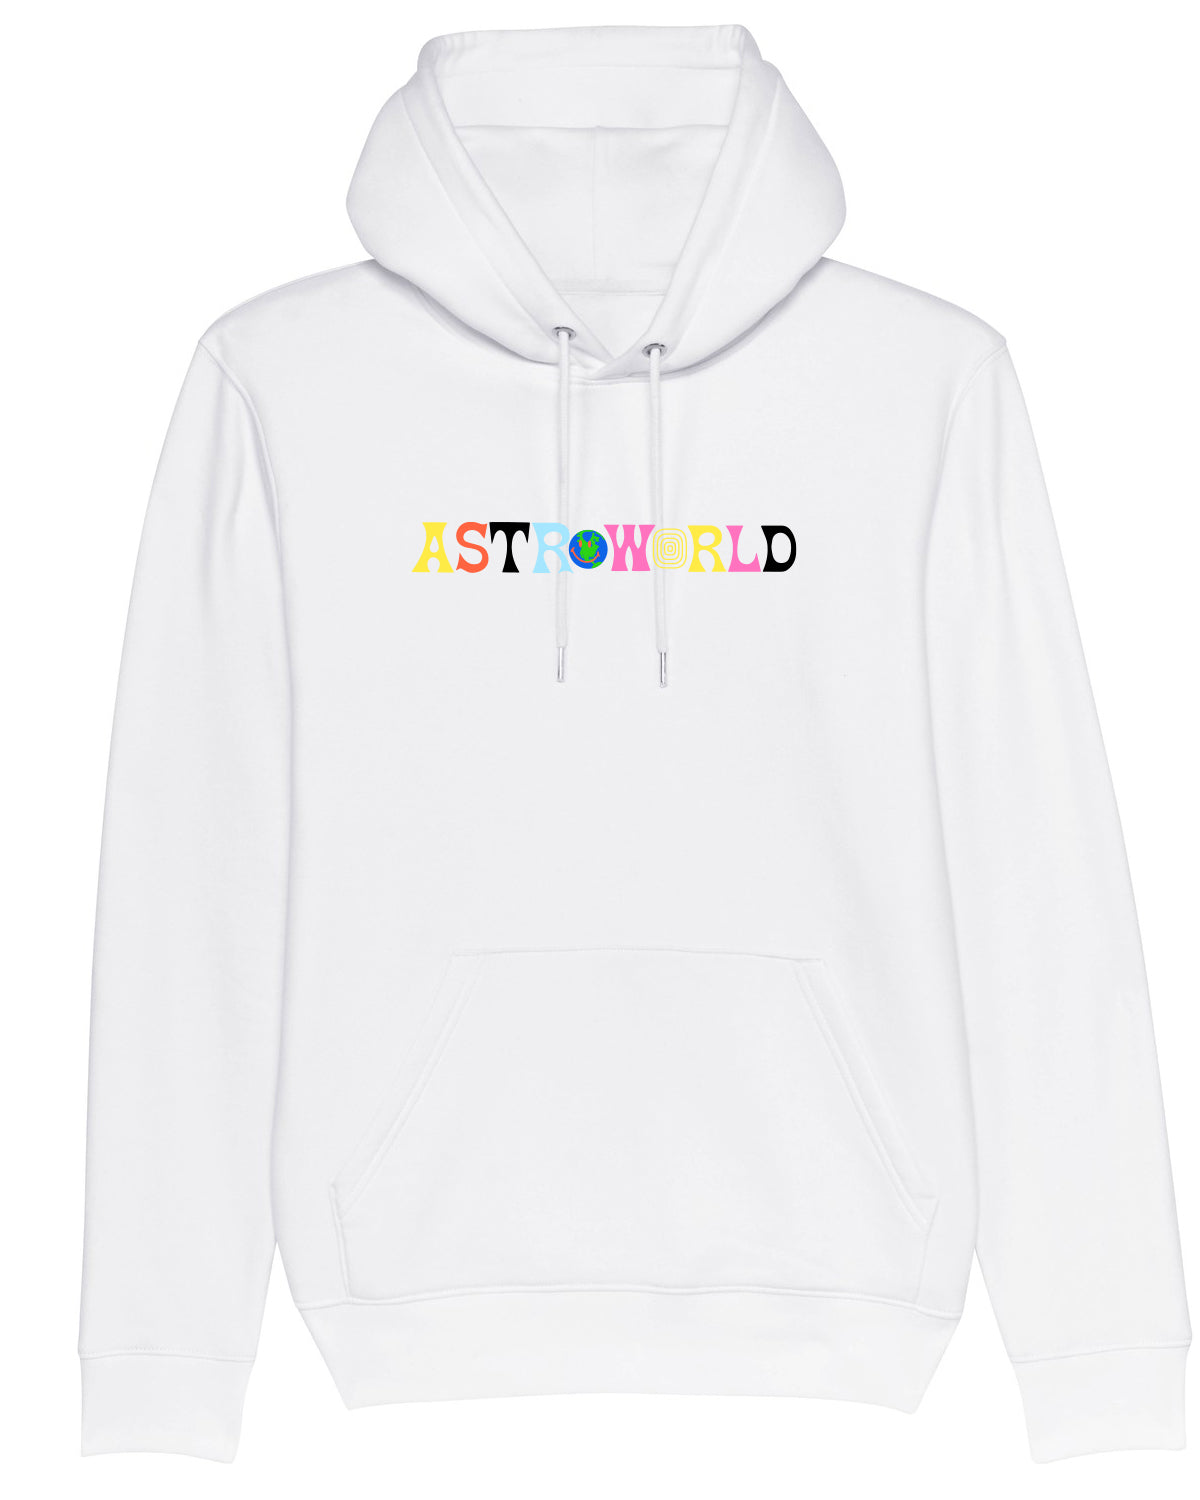 Hoodie Earth Astroworld you were here White